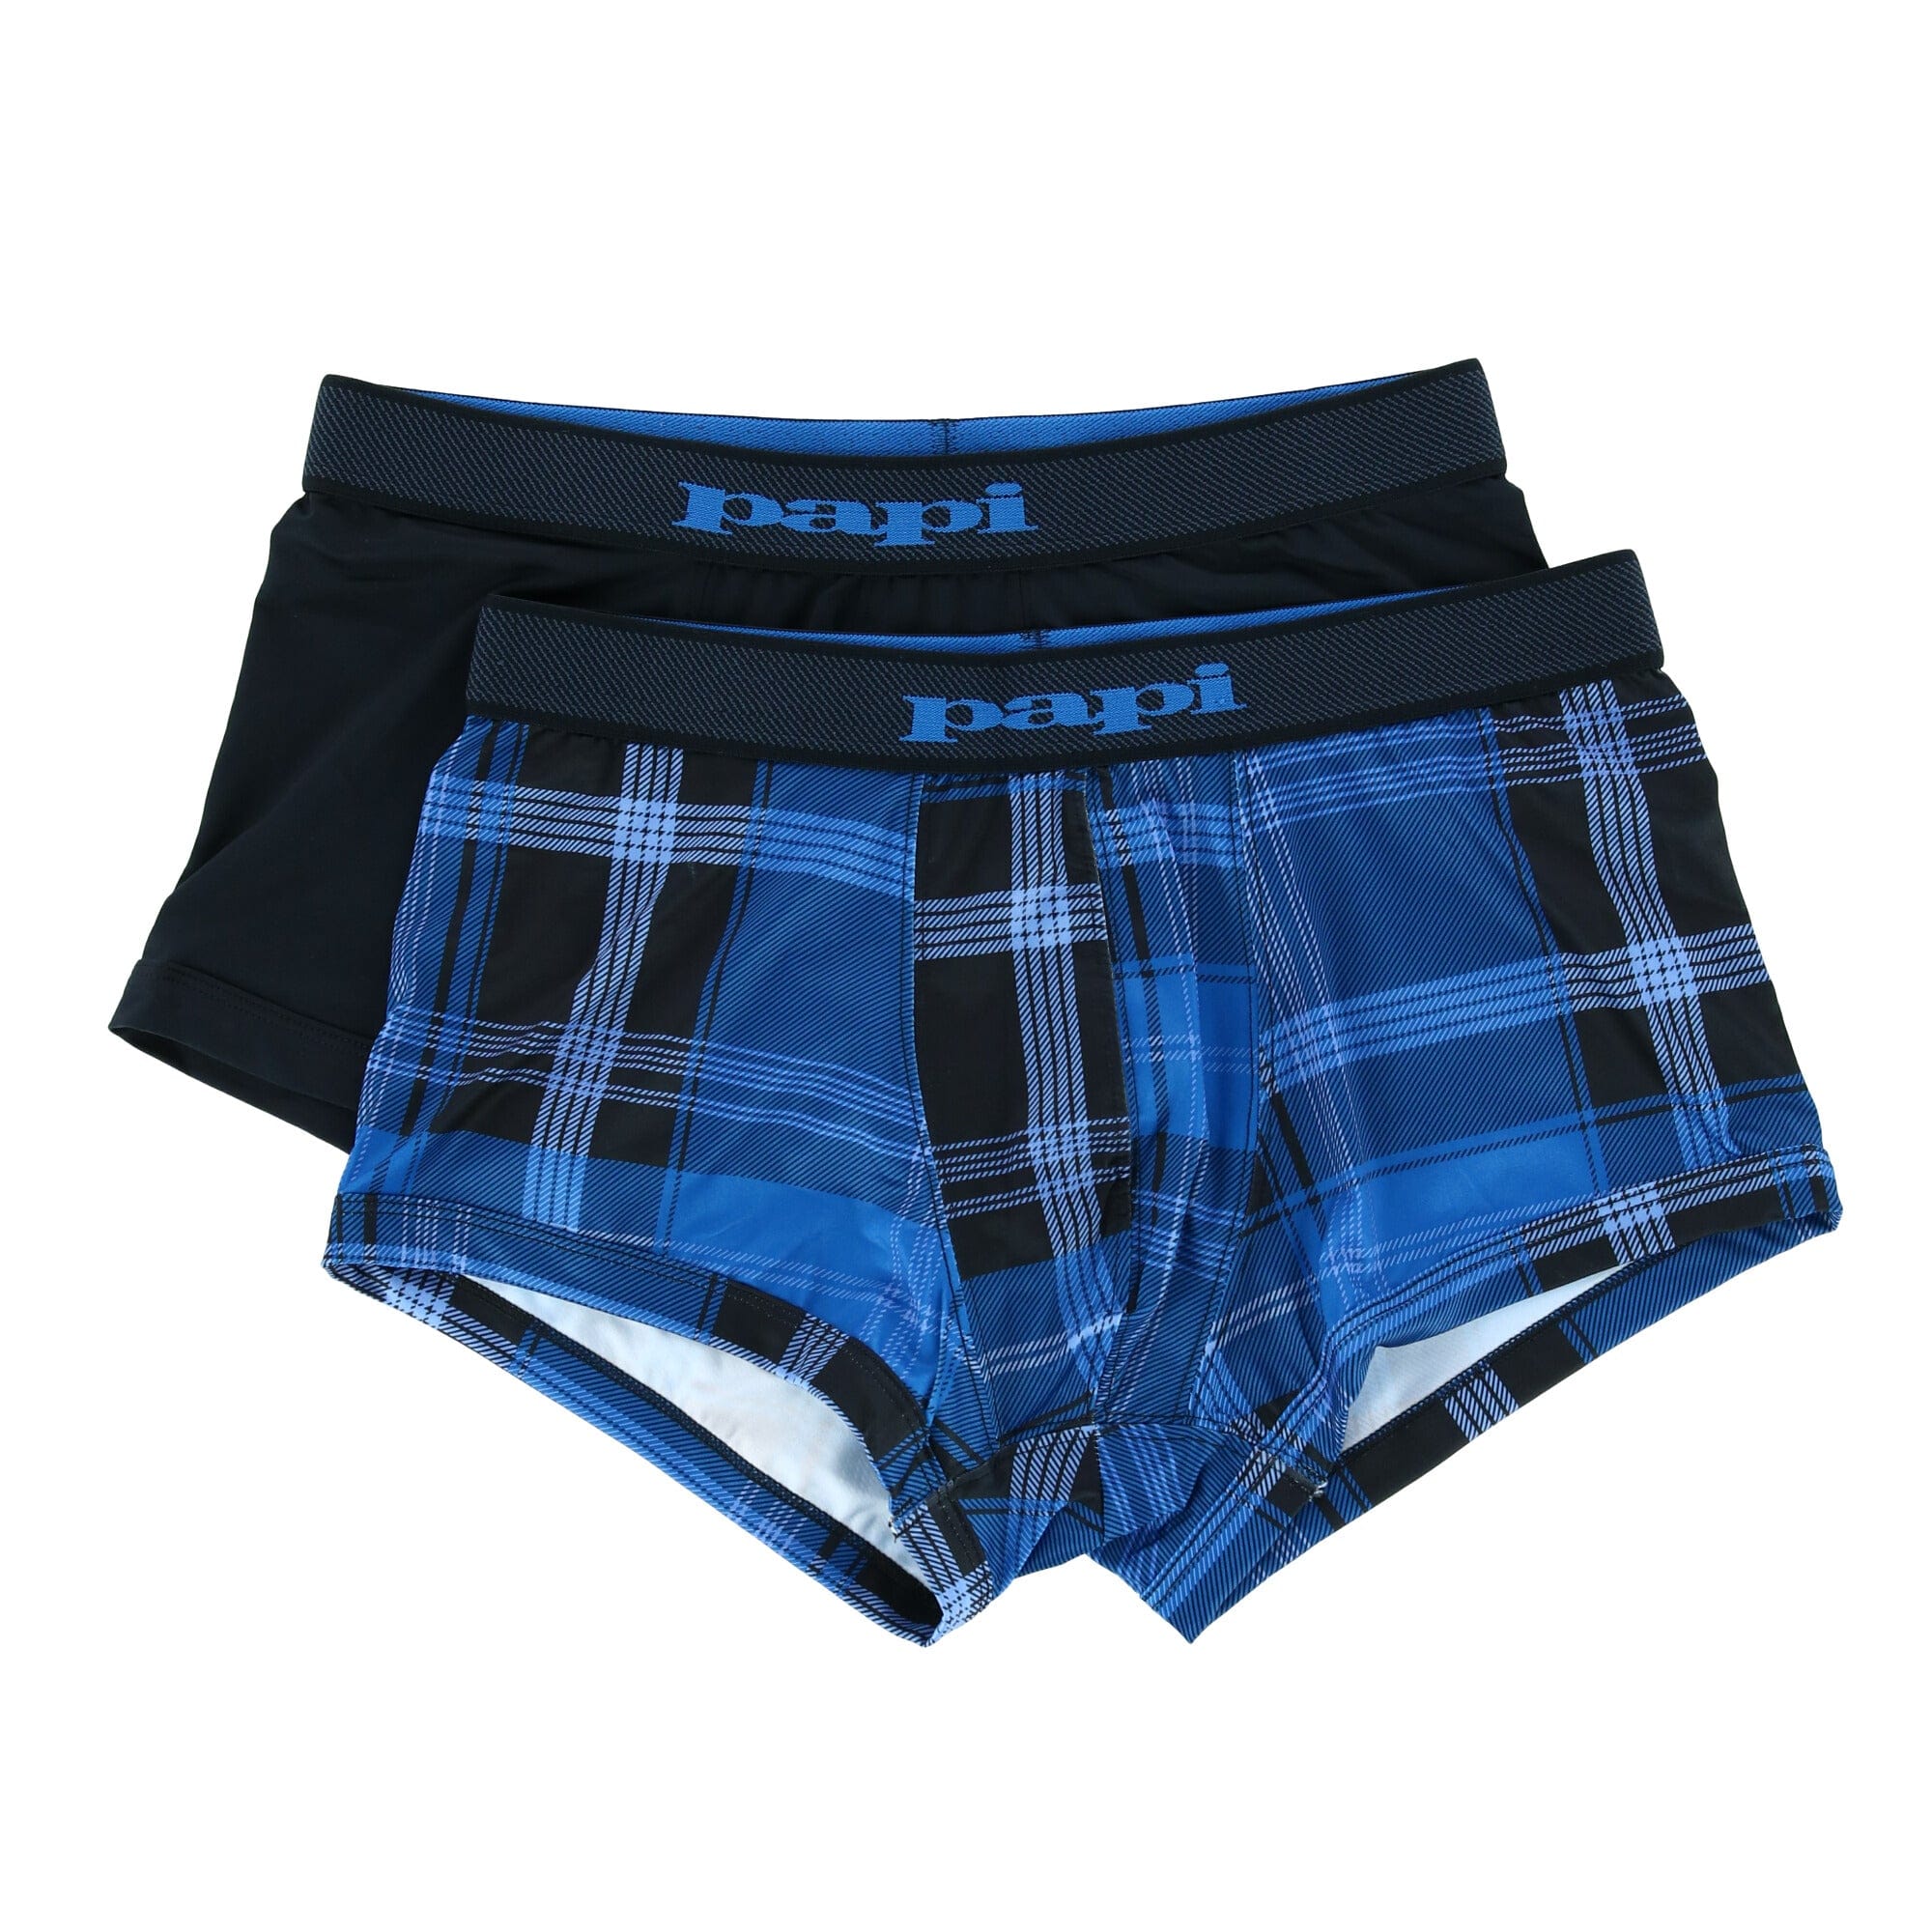 Buy Papi Men's Stylish Brazilian Solid and Print Trunks (3-Pack of Men's  Underwear) on